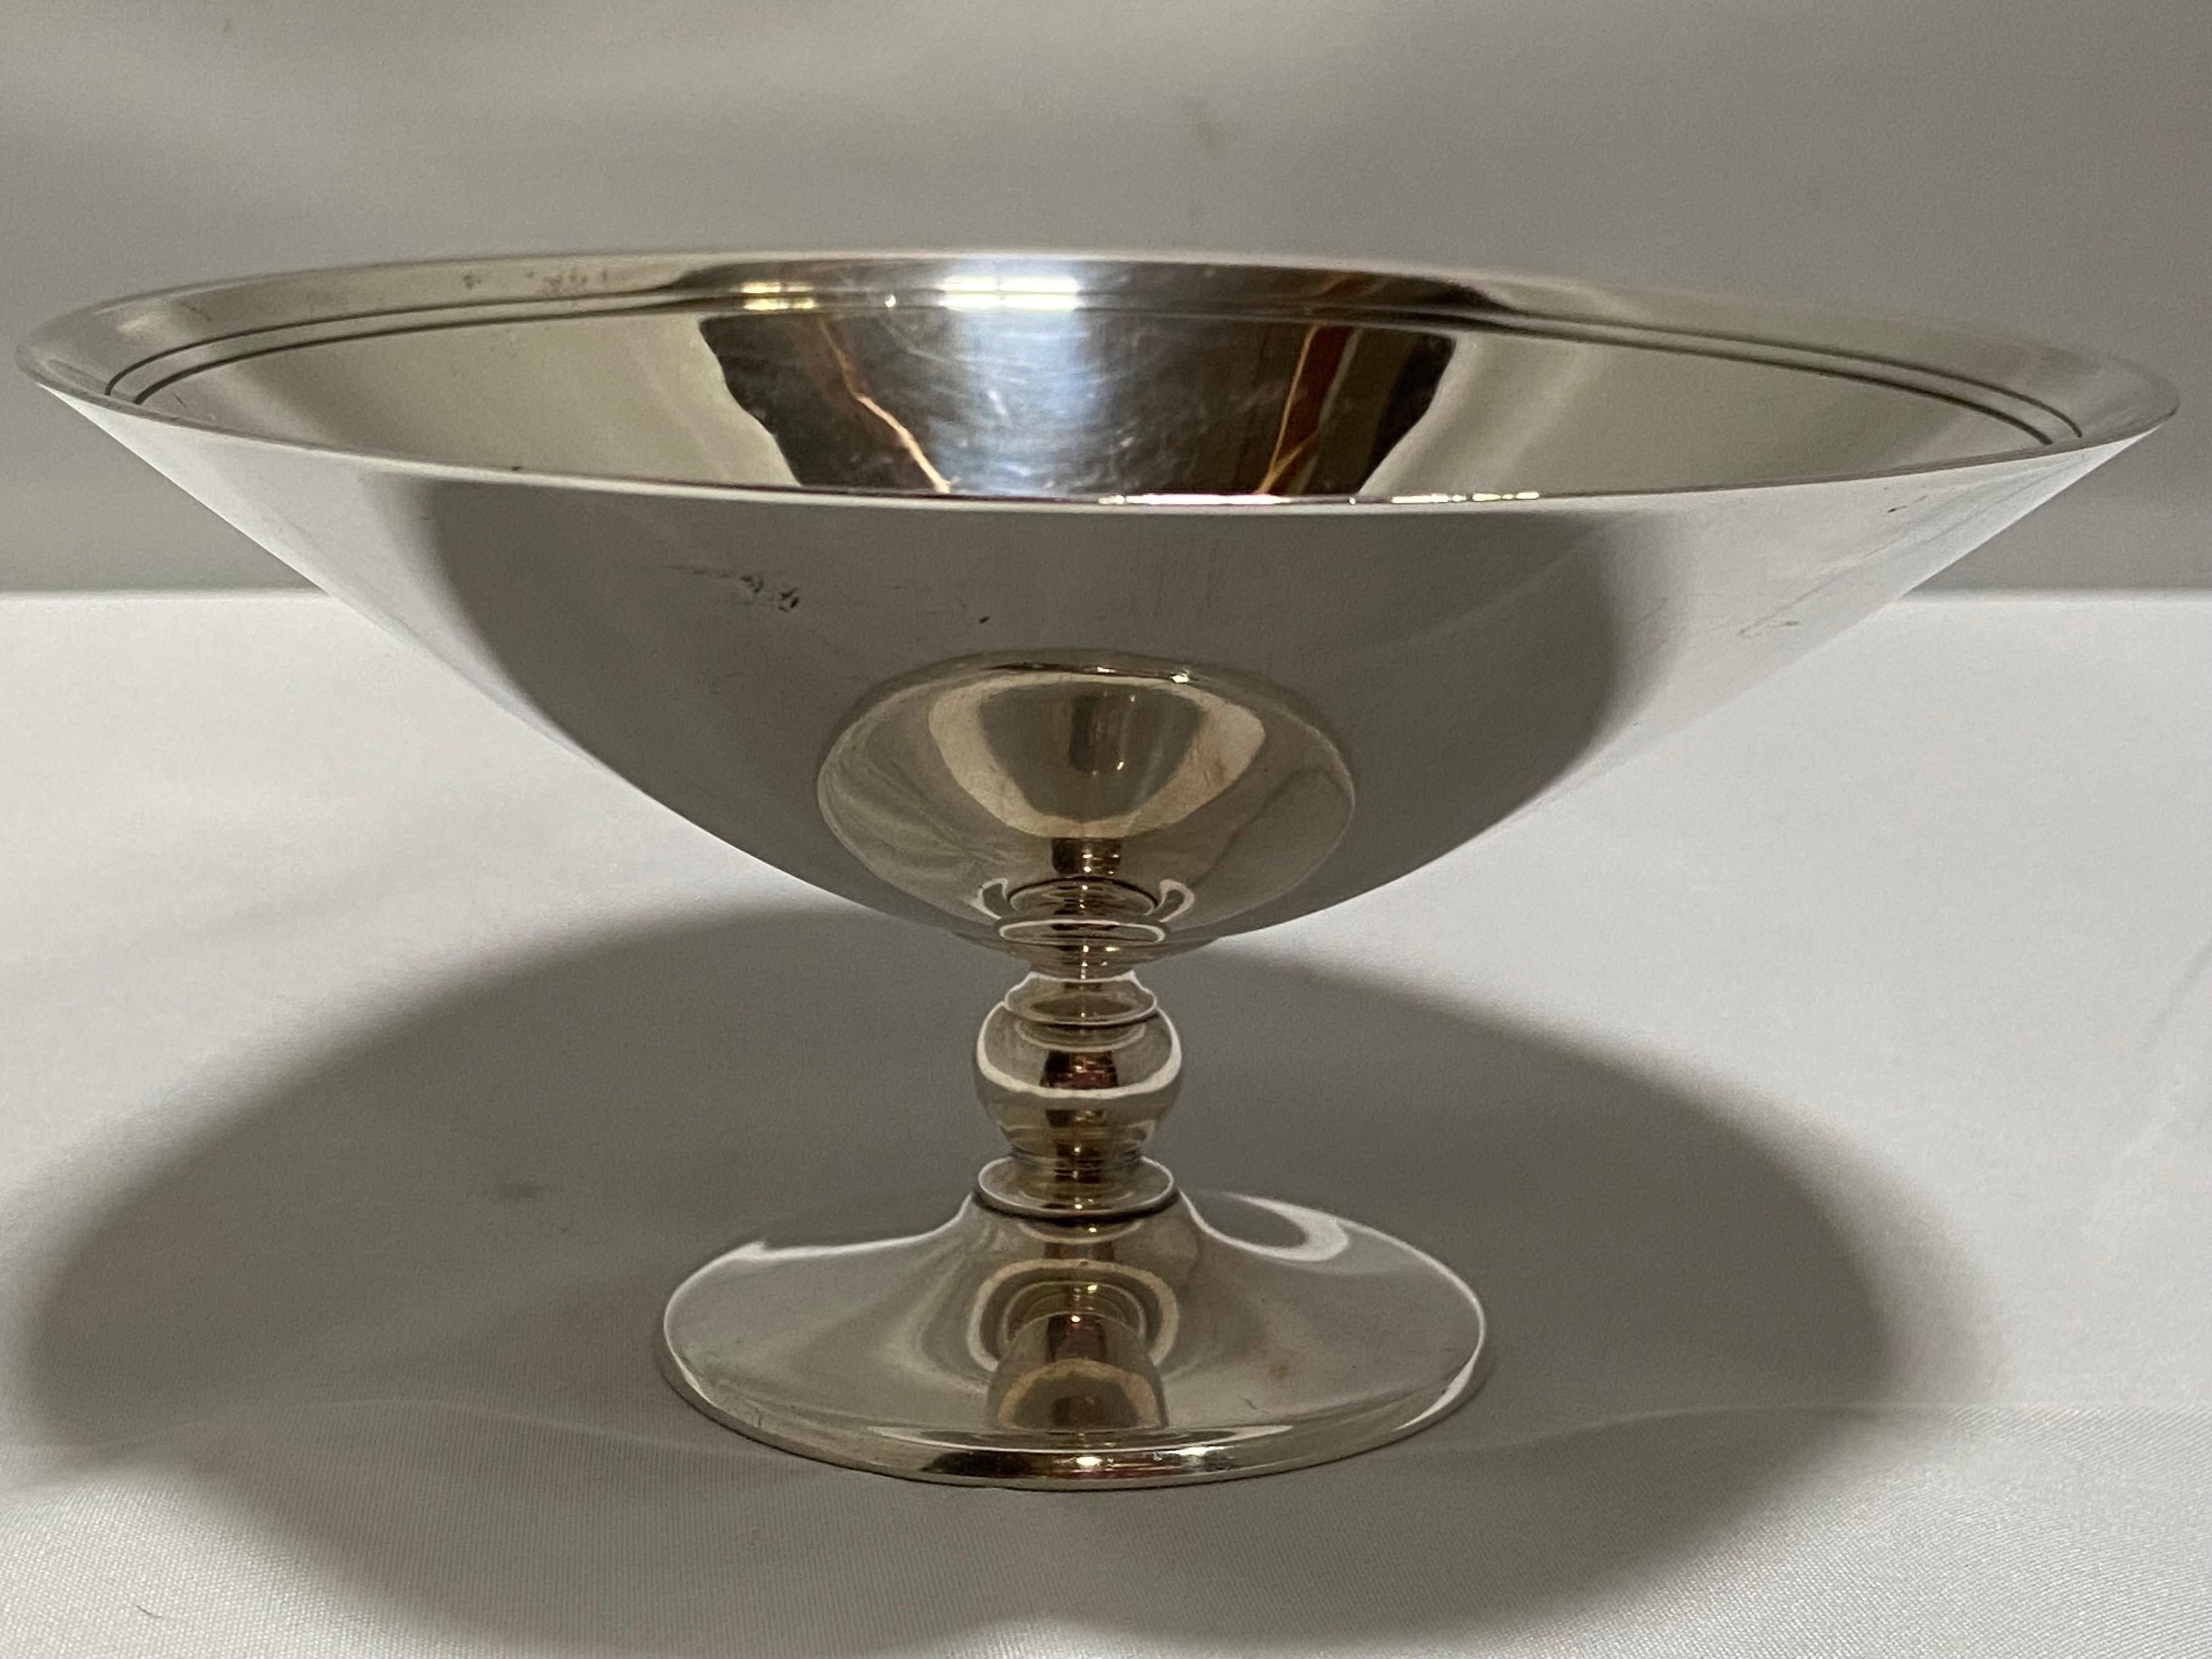 Tiffany and Company 1940's Sterling Silver Footed Bowl or Compote Dish For Sale 2